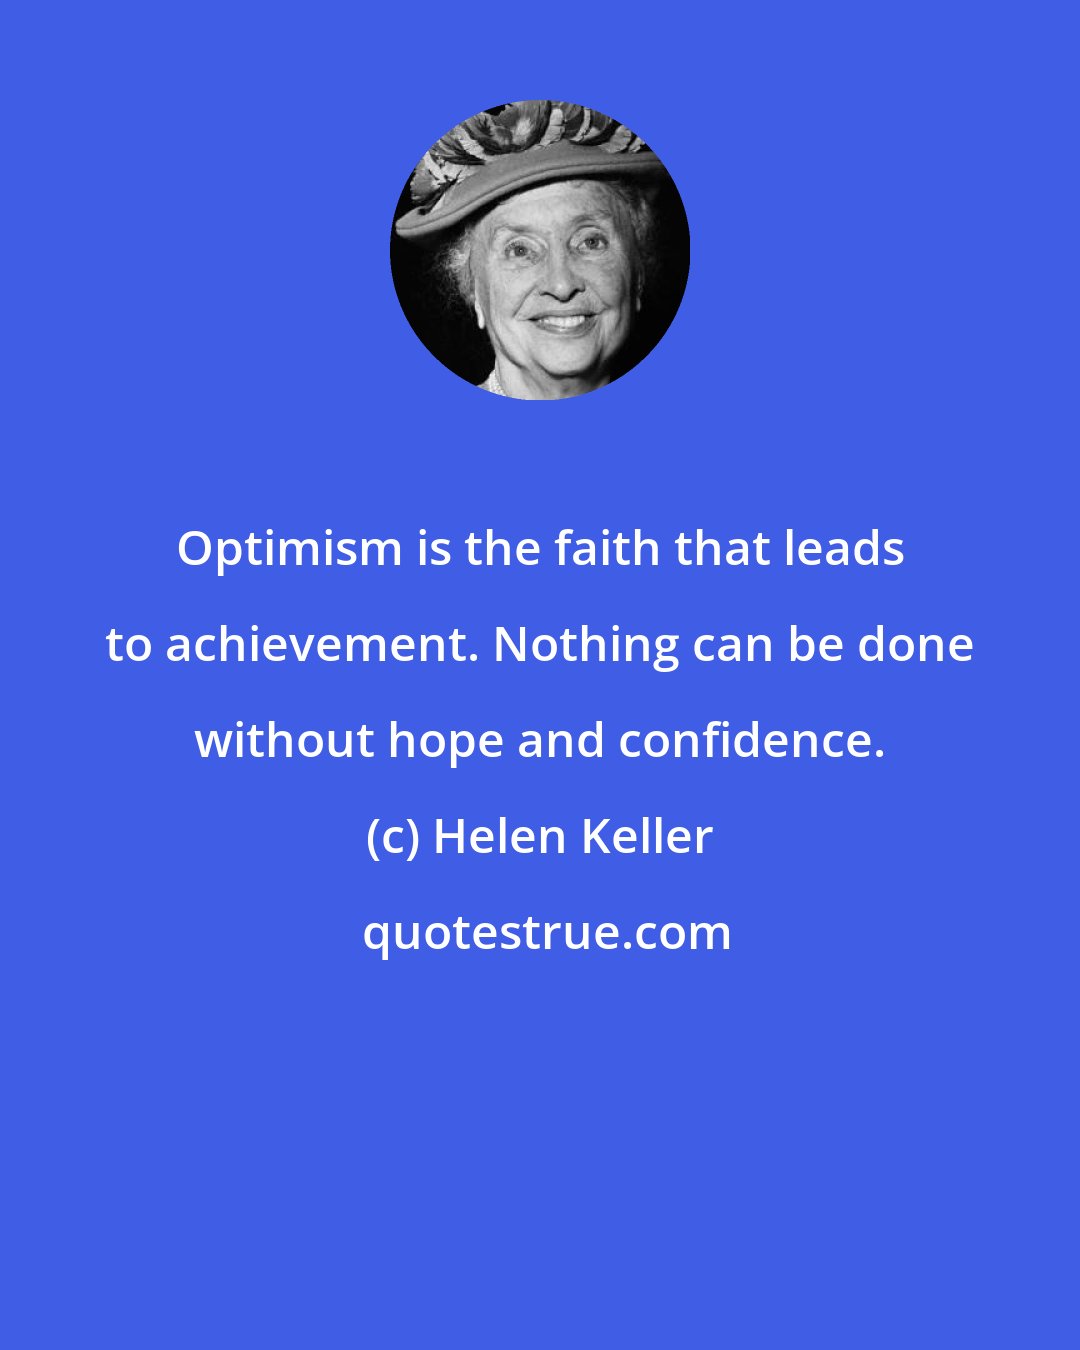 Helen Keller: Optimism is the faith that leads to achievement. Nothing can be done without hope and confidence.